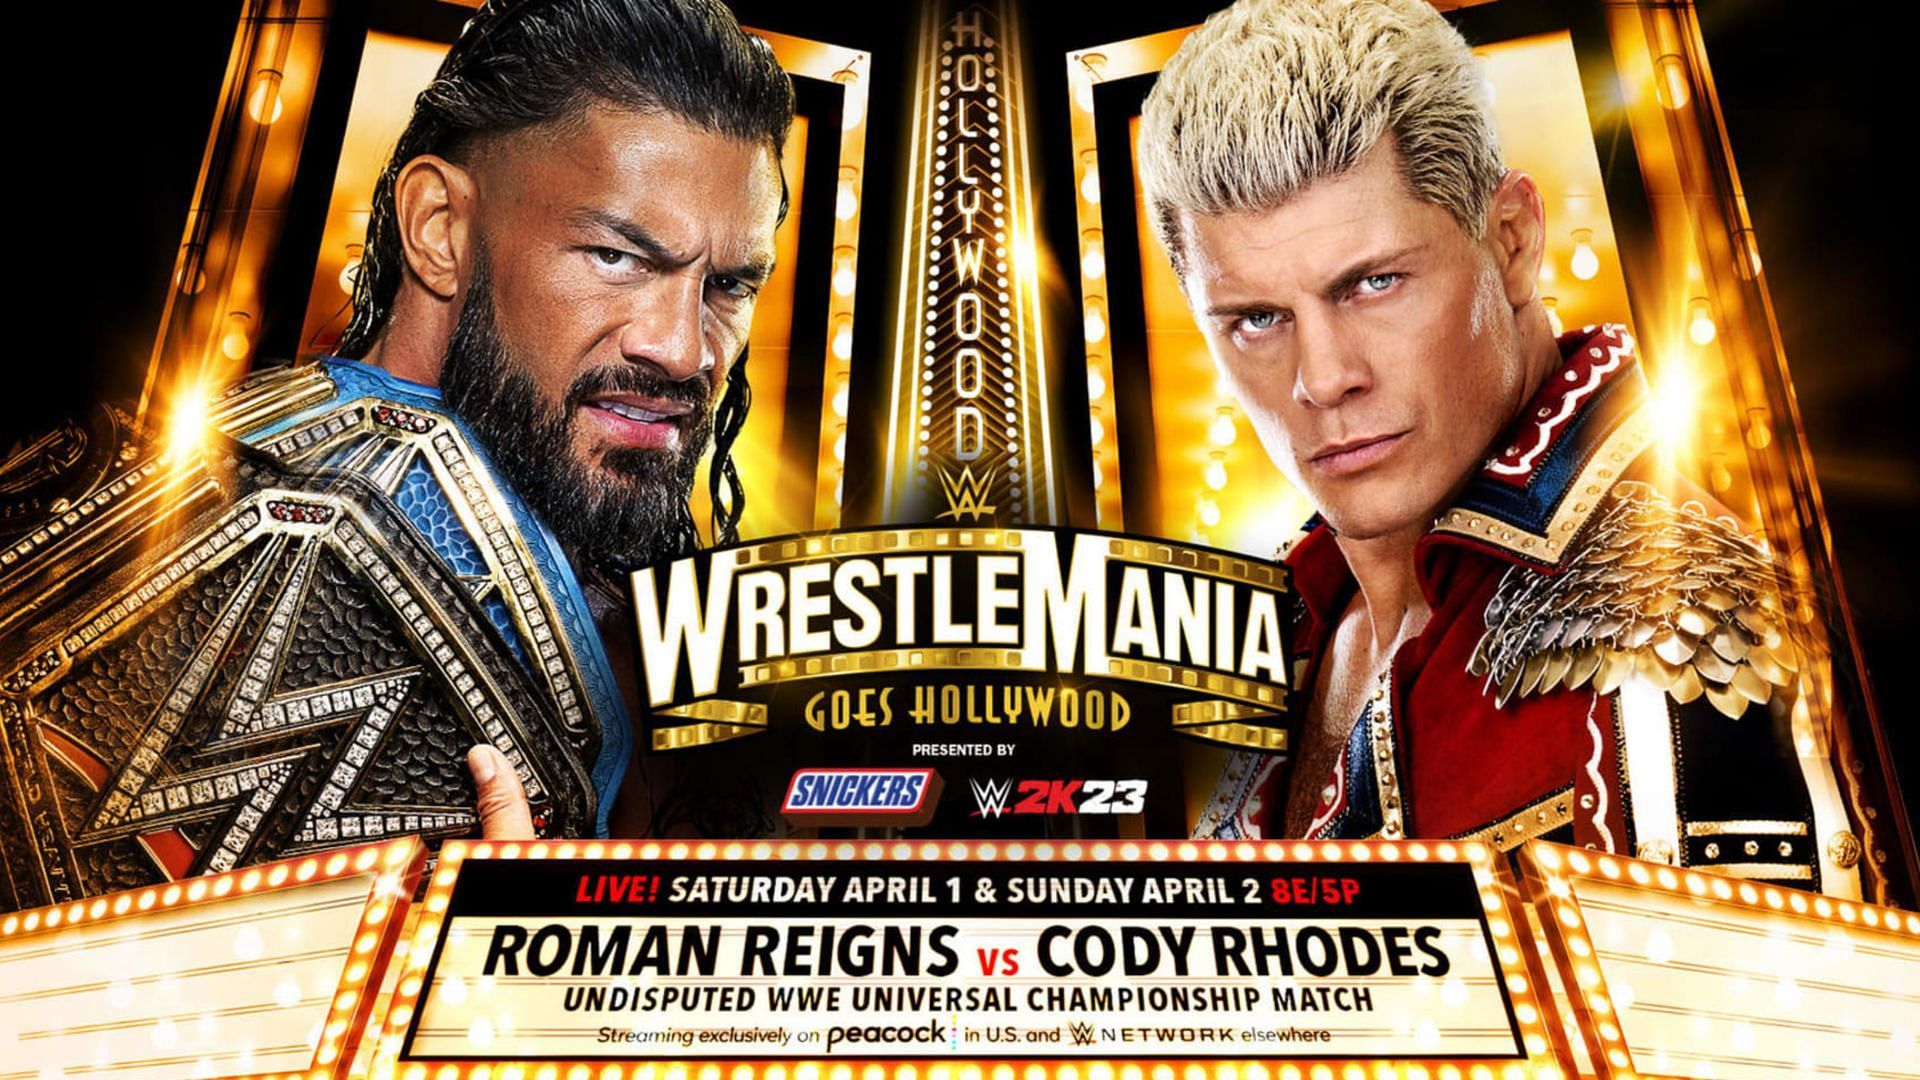 Roman Reigns and Cody Rhodes will main event, but how does the rest of the WrestleMania card pan out?